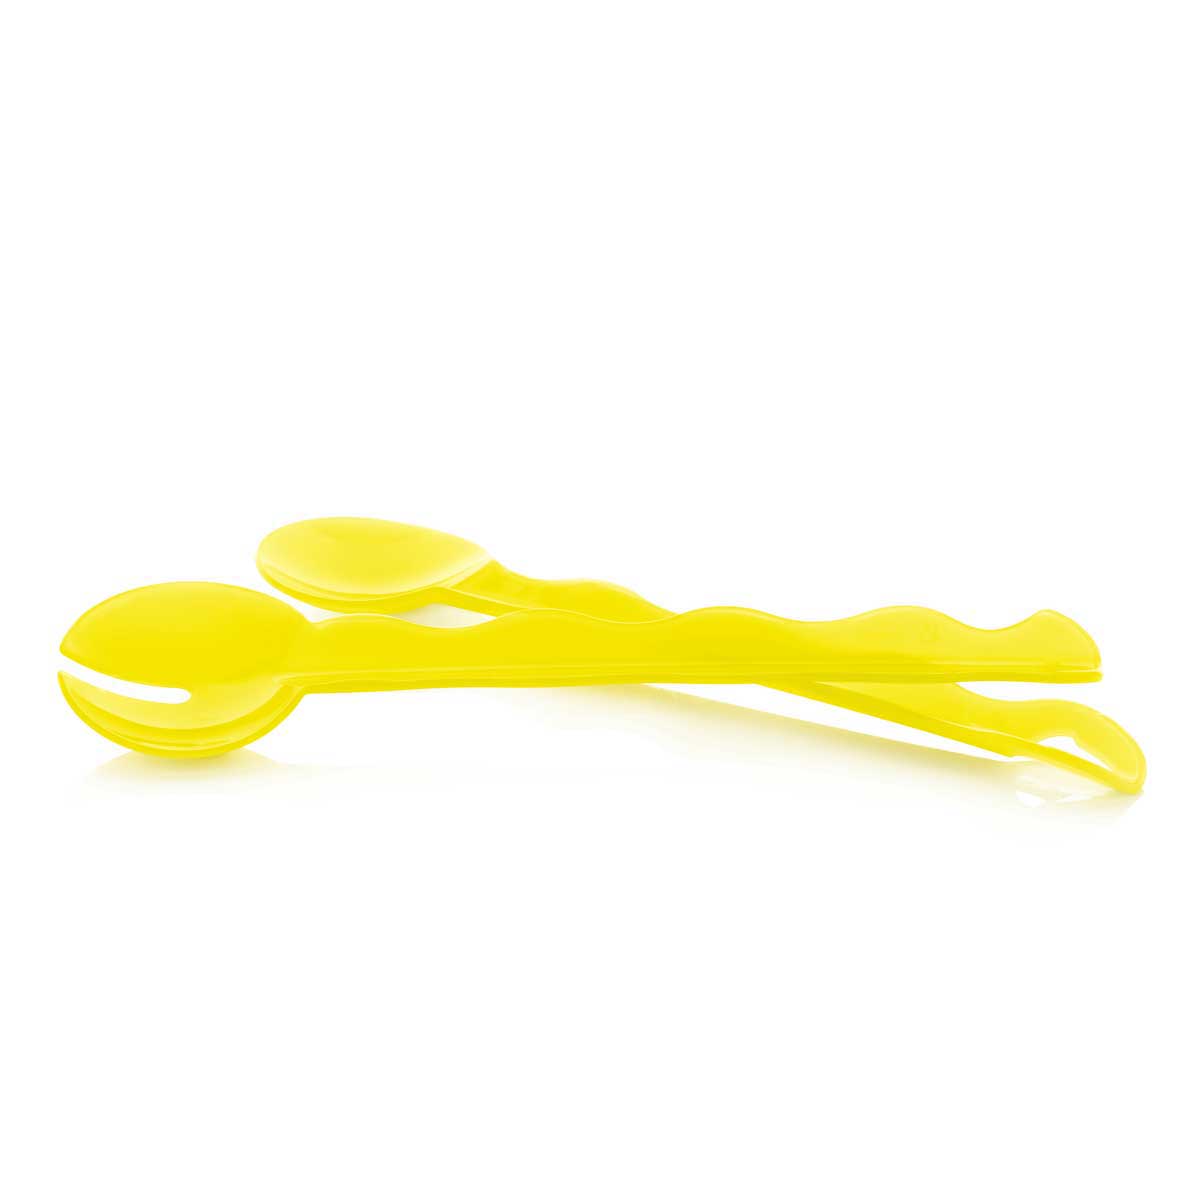 Fanciful Floral Serving Spoons